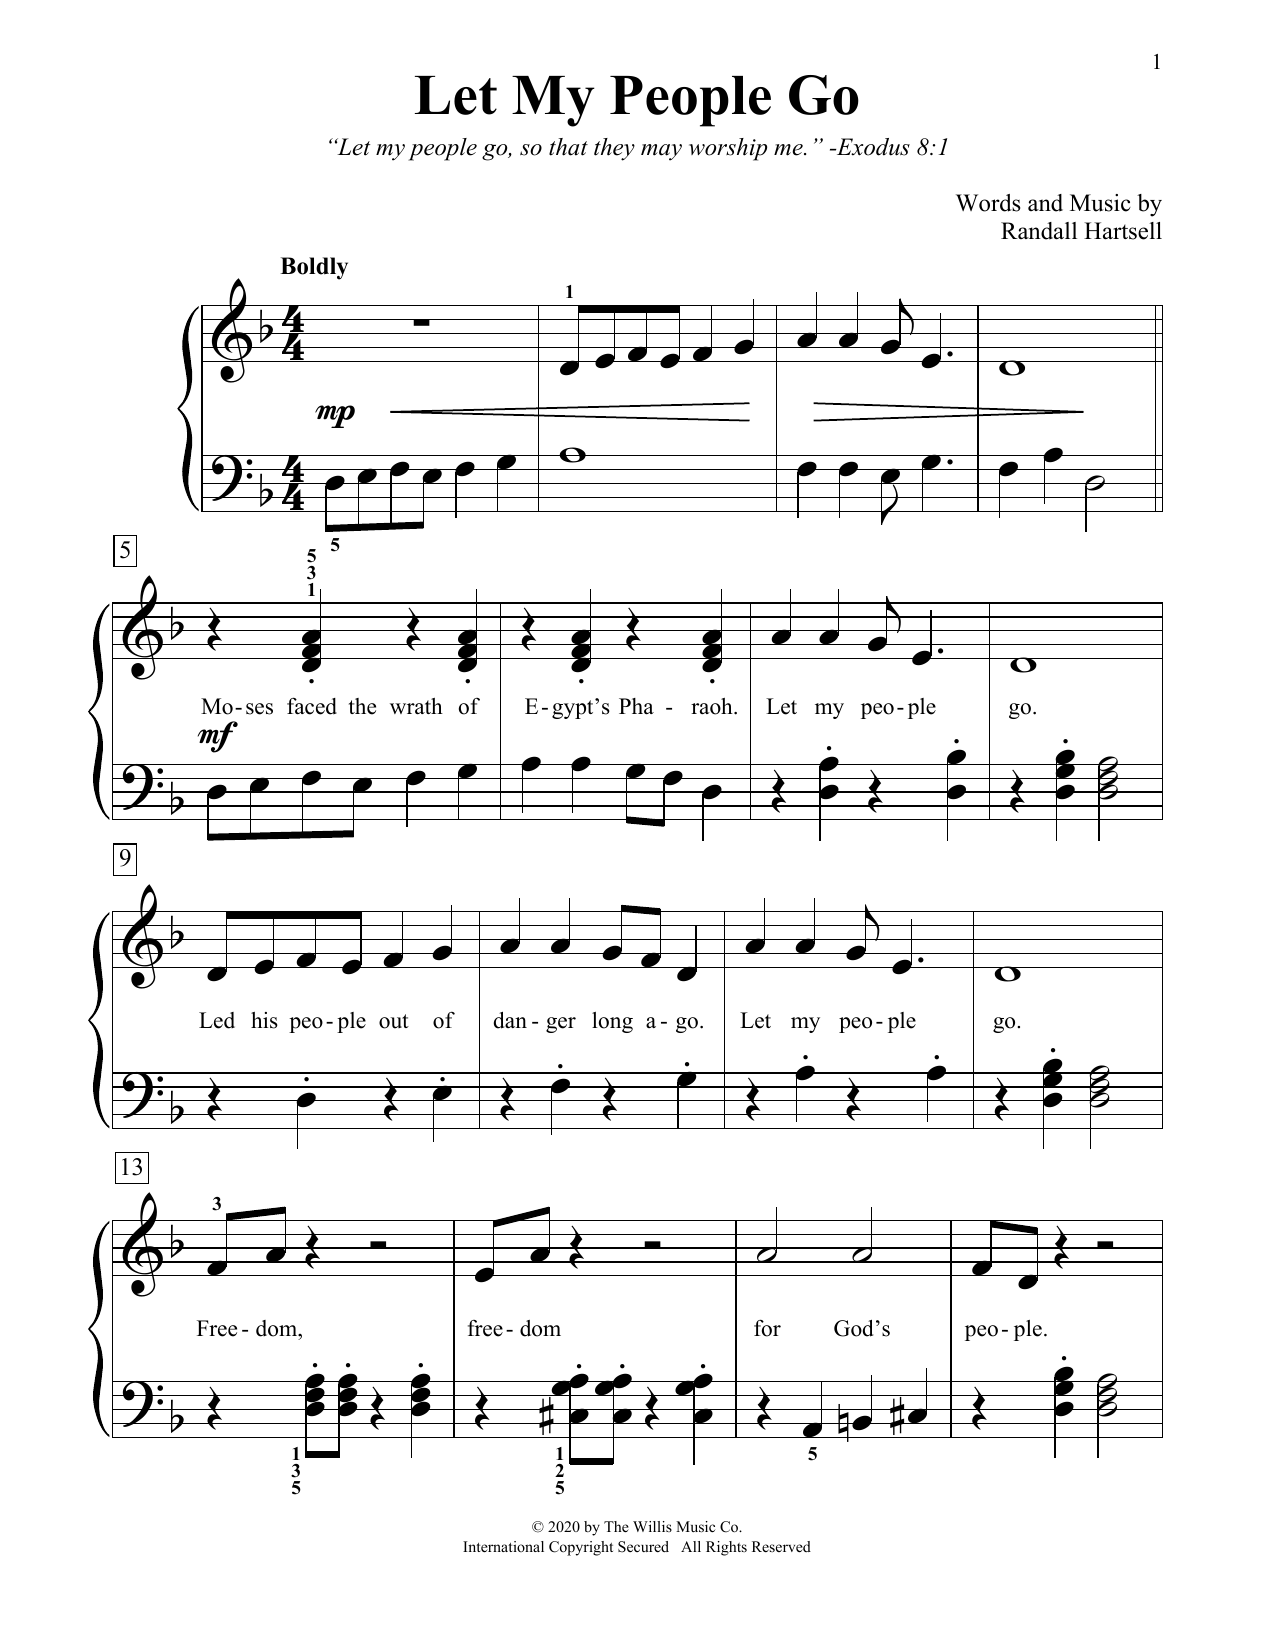 Download Randall Hartsell Let My People Go Sheet Music